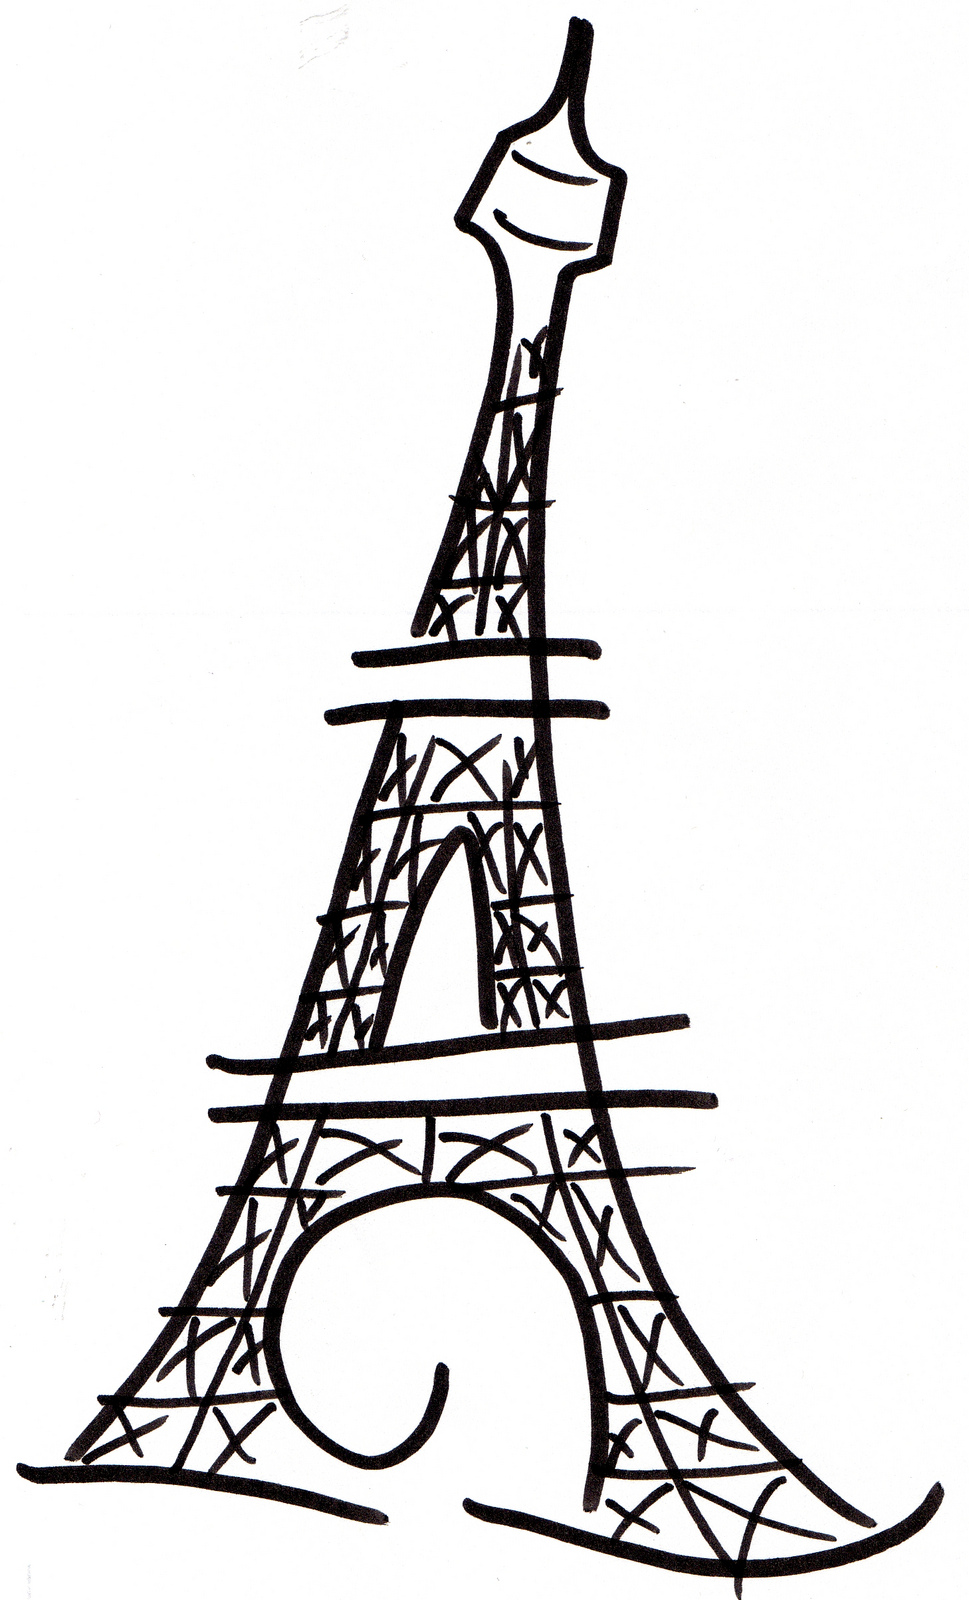 Eiffel Tower Clip Art to Download - dbclipart.com